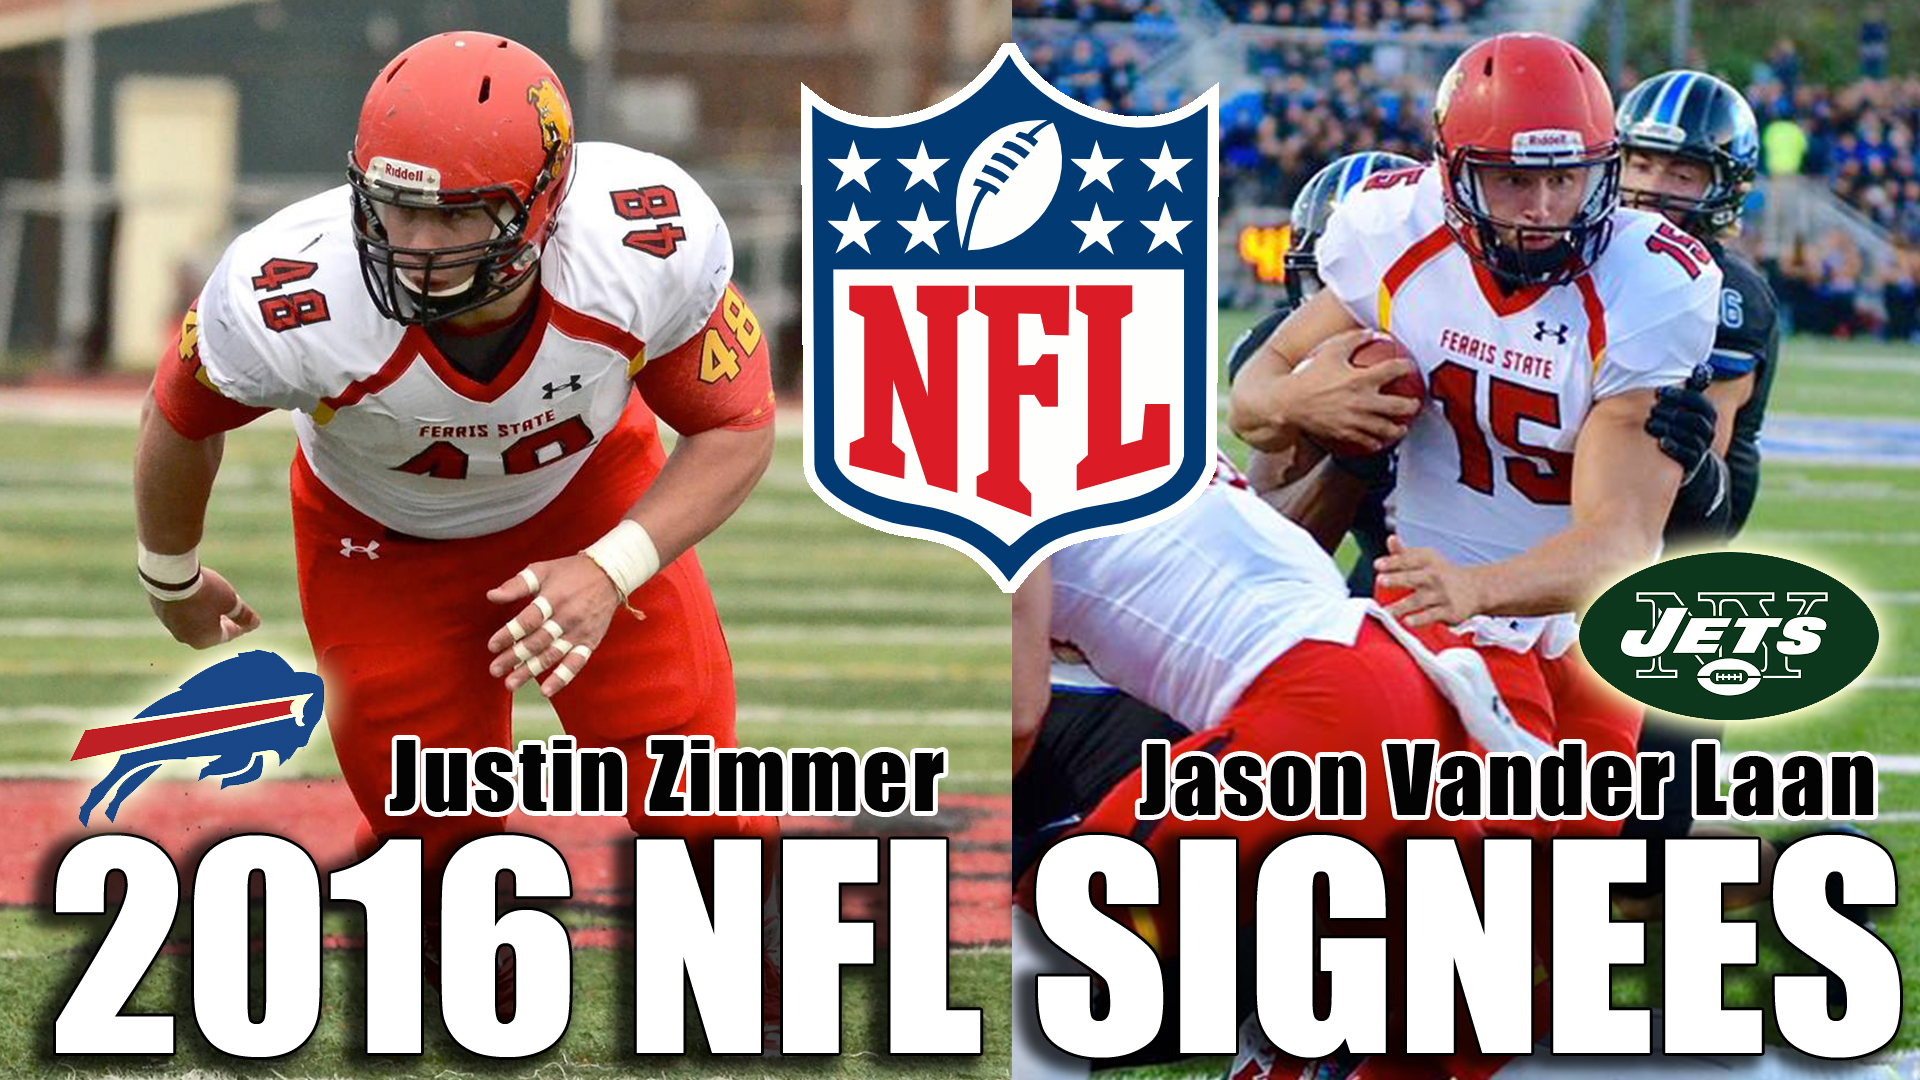 Ferris State Standouts Vander Laan & Zimmer Sign NFL Free Agent Contracts